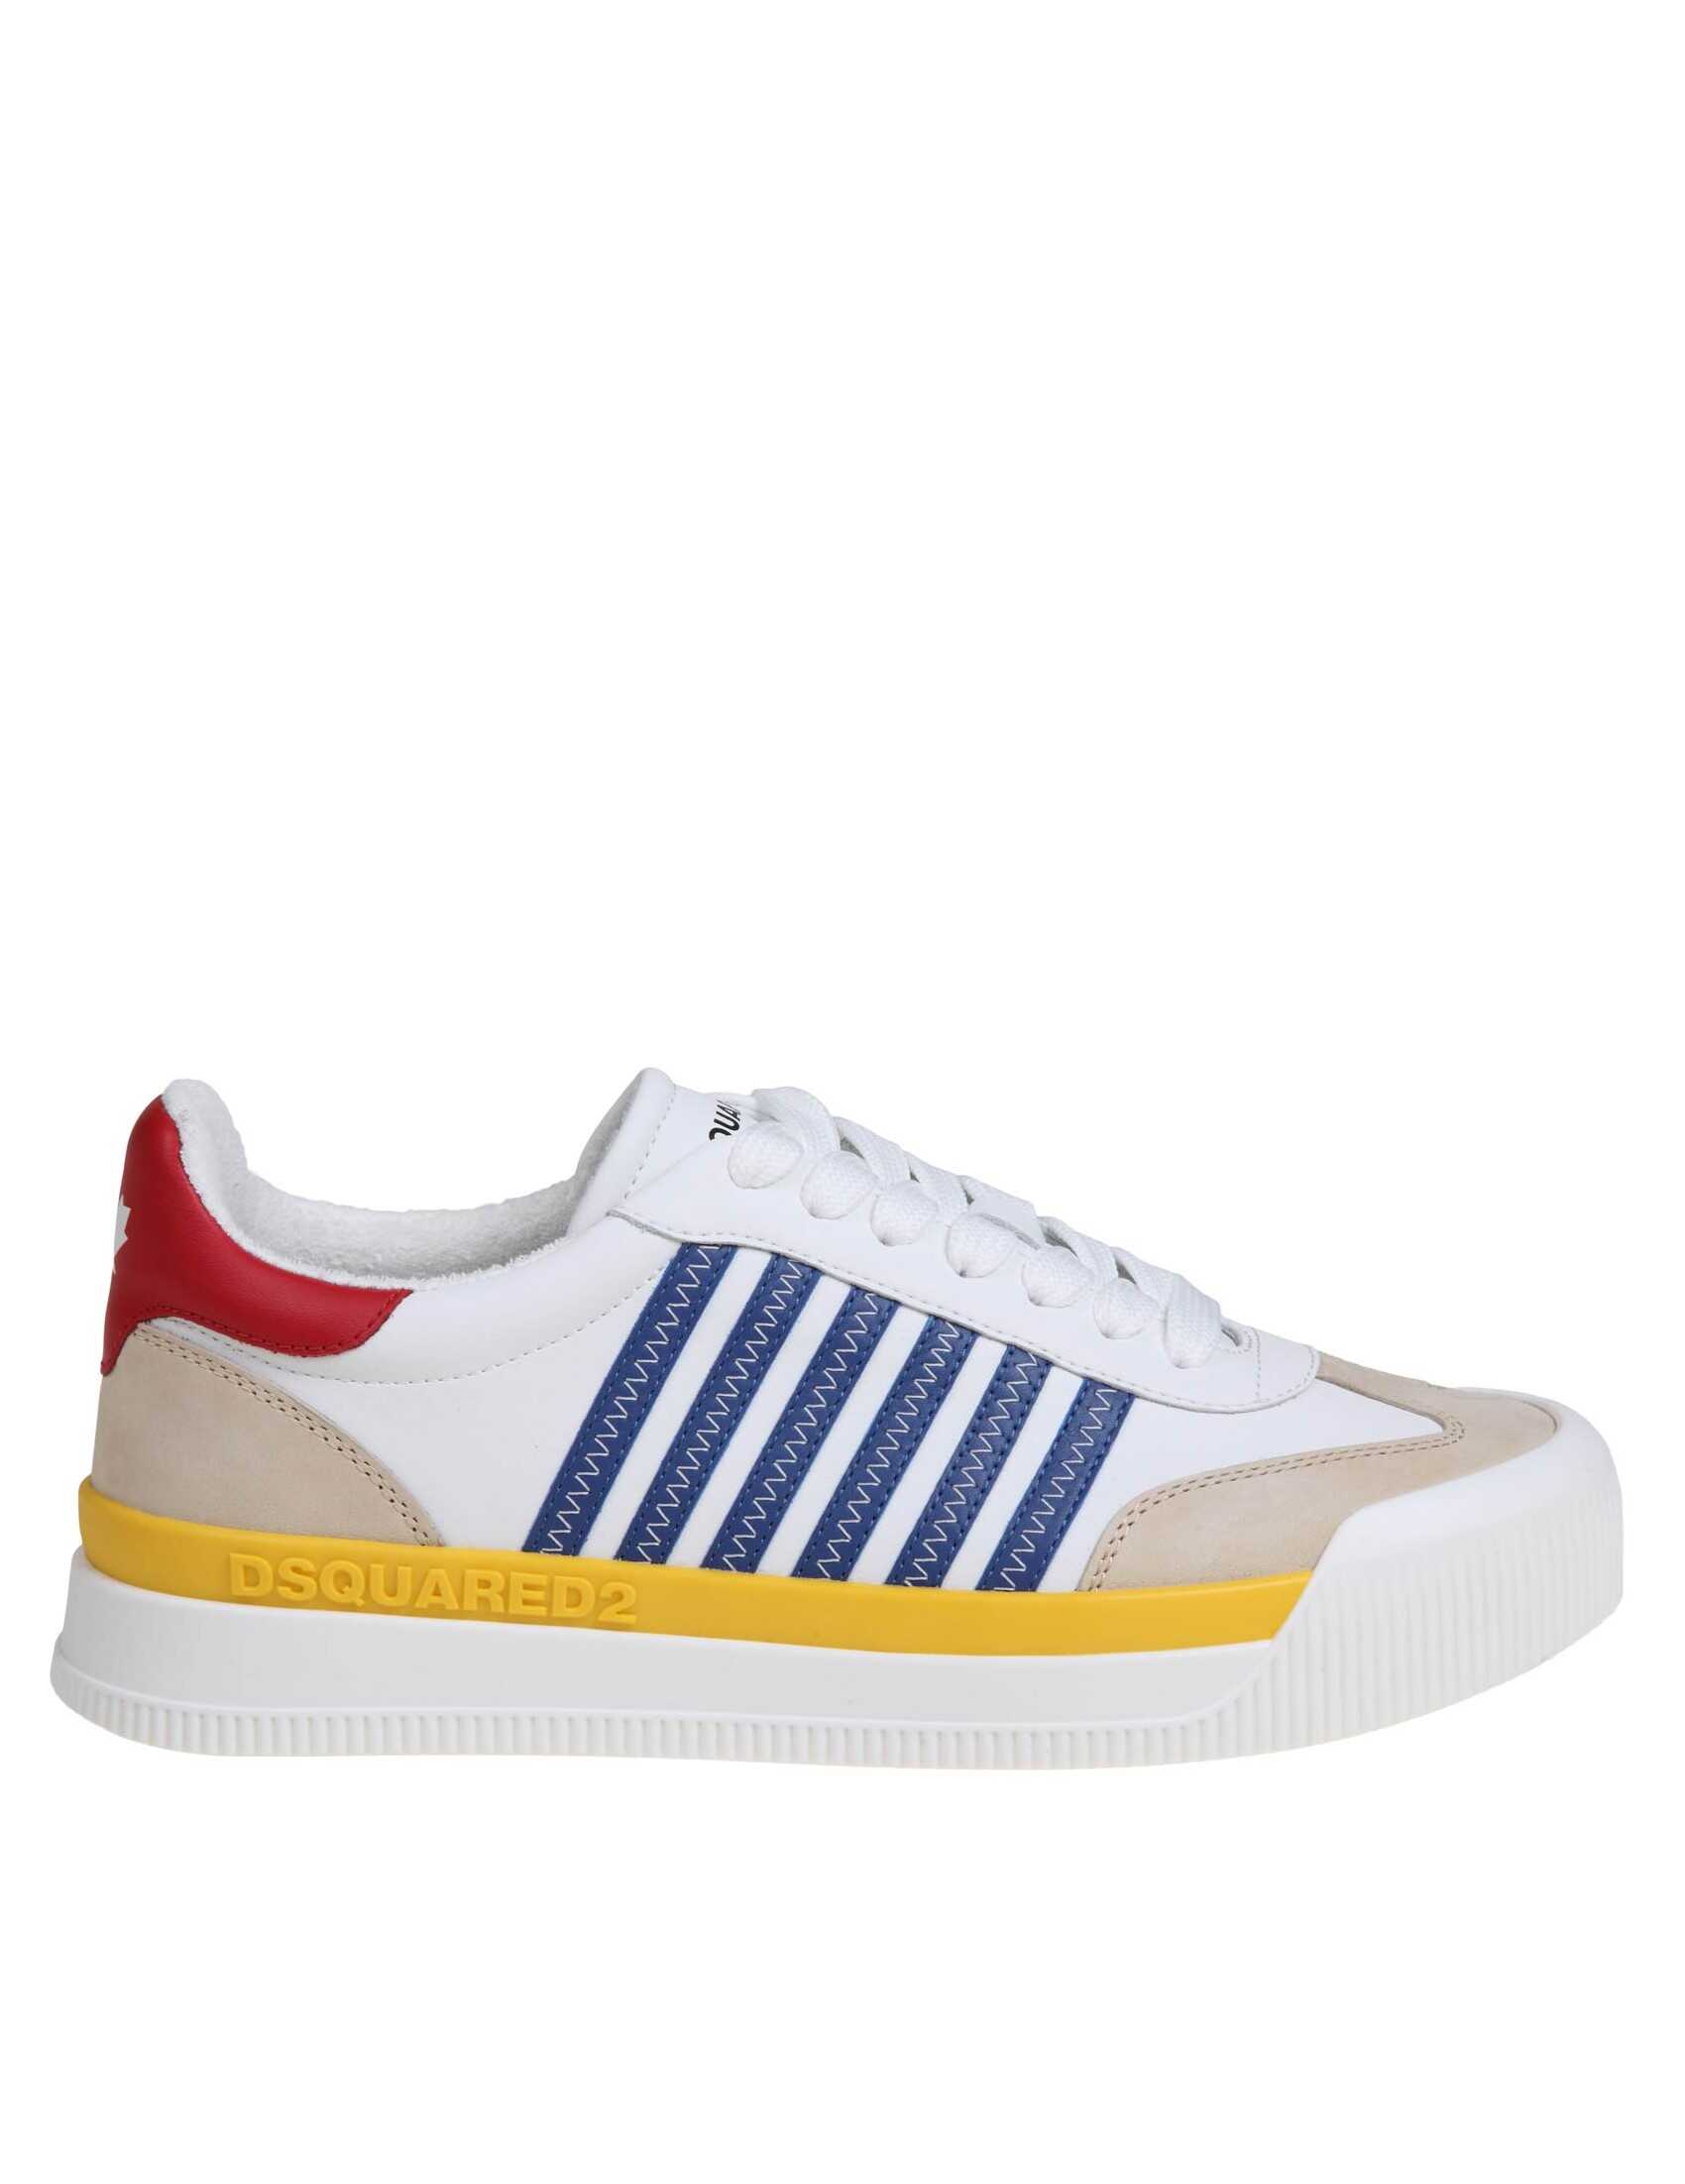 DSQUARED2 Dsquared2 new jersey sneakers in white/blue leather Blue